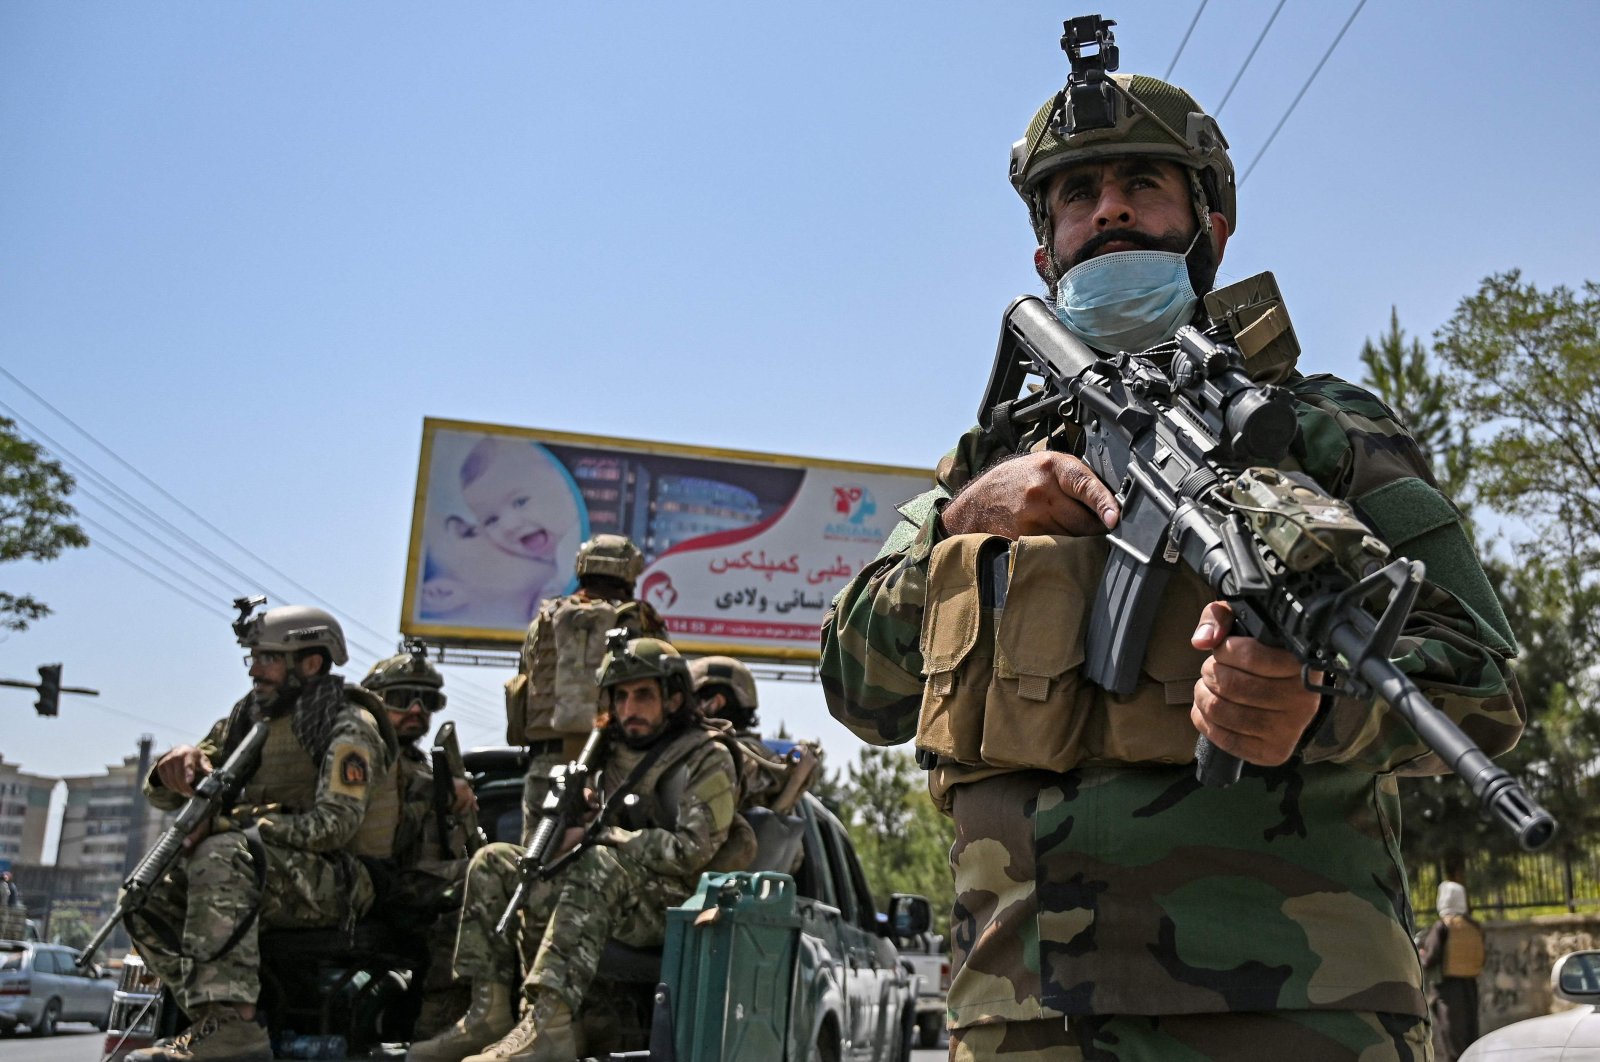 A Taliban special forces unit stands guard on a street in Kabul, Afghanistan, Aug. 29, 2021. (AFP Photo)